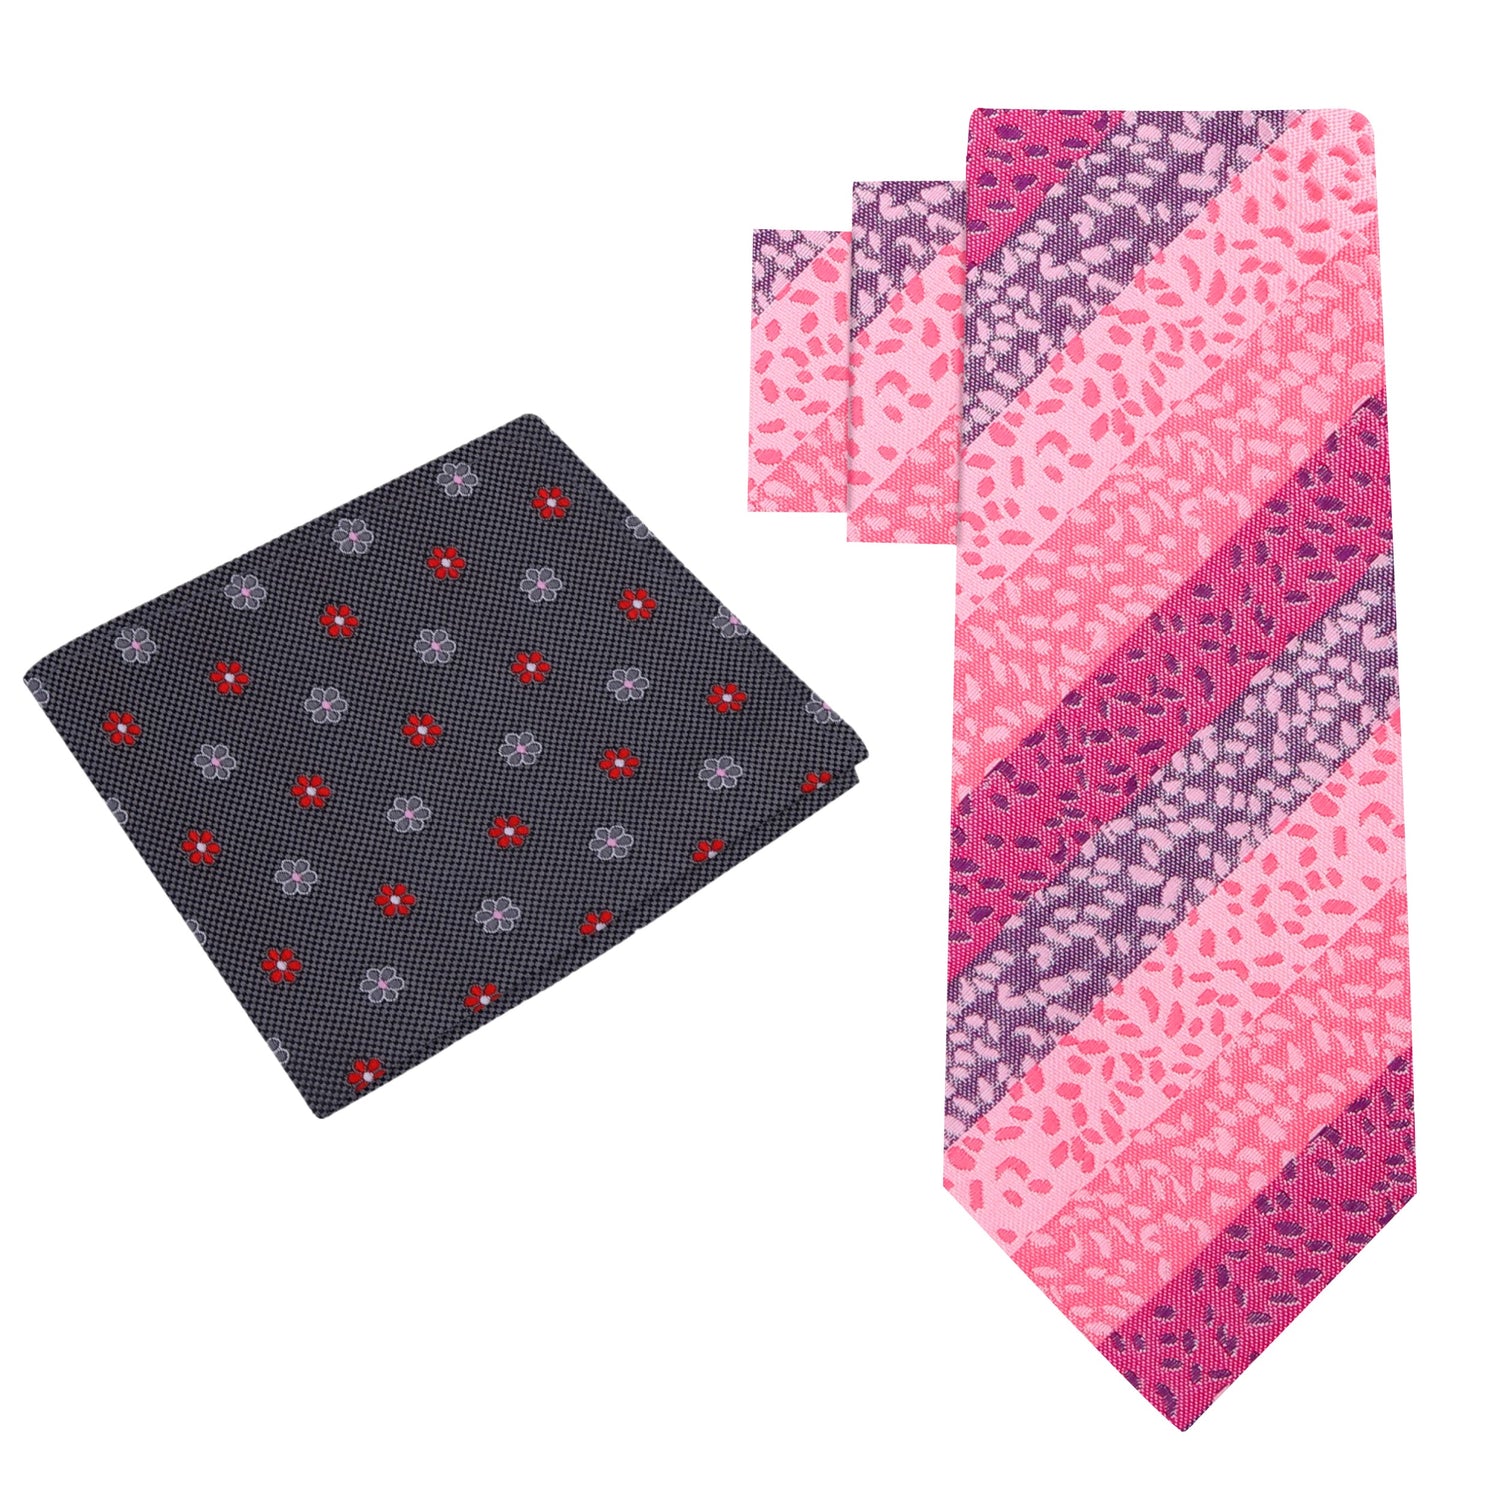 Alt View: Shades of Pink with stripes and texture silk tie and accenting grey and pink floral pocket square